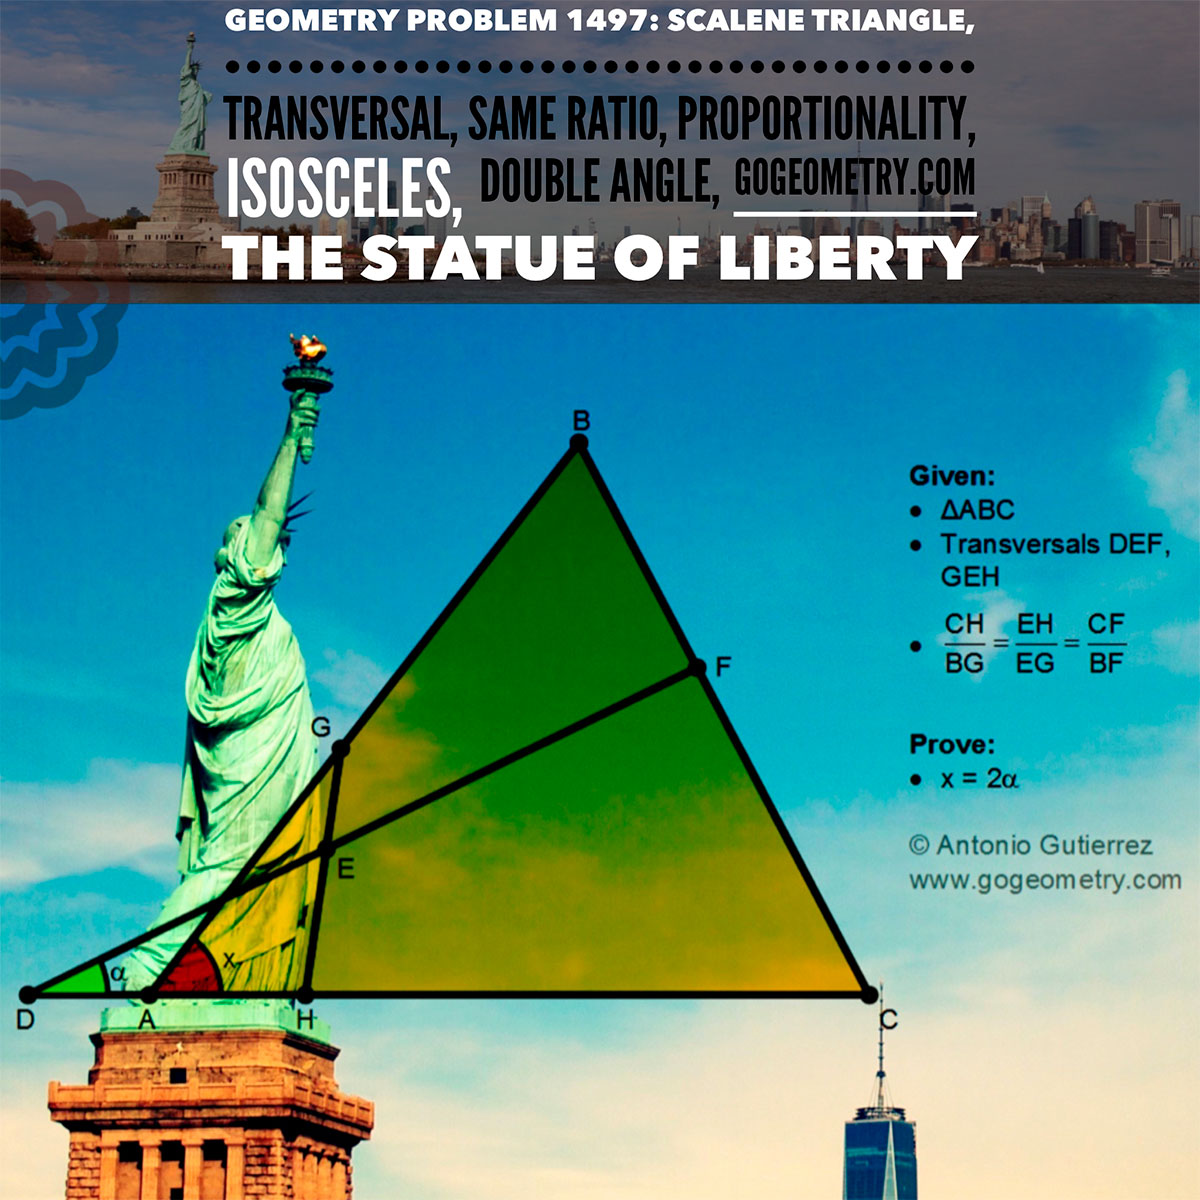 Geometry Problem 1497: Triangle, Transversal, Same Ratio, Proportionality, Isosceles, Double Angle, Statue of Liberty in the background